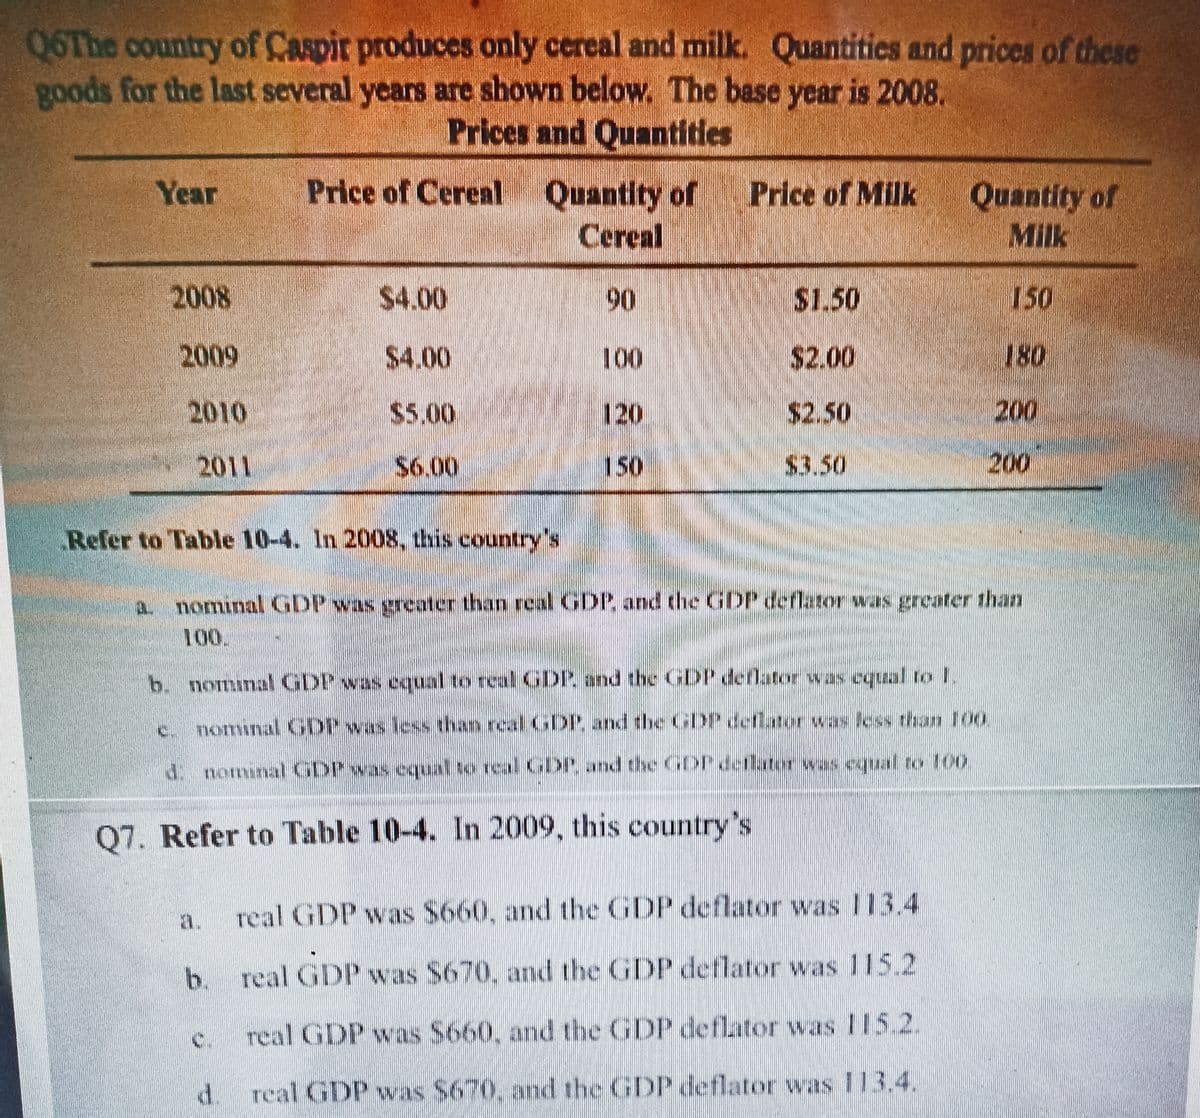 Q6The country of Caspir produces only cereal and milk. Quantities and prices of these
goods for the last several years are shown below. The base year is 2008.
Prices and Quantities
Year
2008
2009
2010
2011
Price of Cereal Quantity of Price of Milk
Cereal
$4.00
$4.00
Refer to Table 10-4. In 2008, this country's
$6.00
a.
d.
90
120
150
$1.50
$2.00
$2.50
$3.50
b. nominal GDP was equal to real GDP and the GDP deflator was equal to 1
nominal GDP was less than real GDP, and the GDP deflator was less than 100
4. nomunal GDP was equal to real GDP, and the GDP deflator was equal to 100
Q7. Refer to Table 10-4. In 2009, this country's
real GDP was $660, and the GDP deflator was 113.4
b. real GDP was S670, and the GDP deflator was 115.2
real GDP was $660, and the GDP deflator was 115.2.
real GDP was $670, and the GDP deflator was 113.4.
Quantity of
Milk
150
a nominal GDP was greater than real GDP and the GDP deflator was greater than
100.
180
200
200